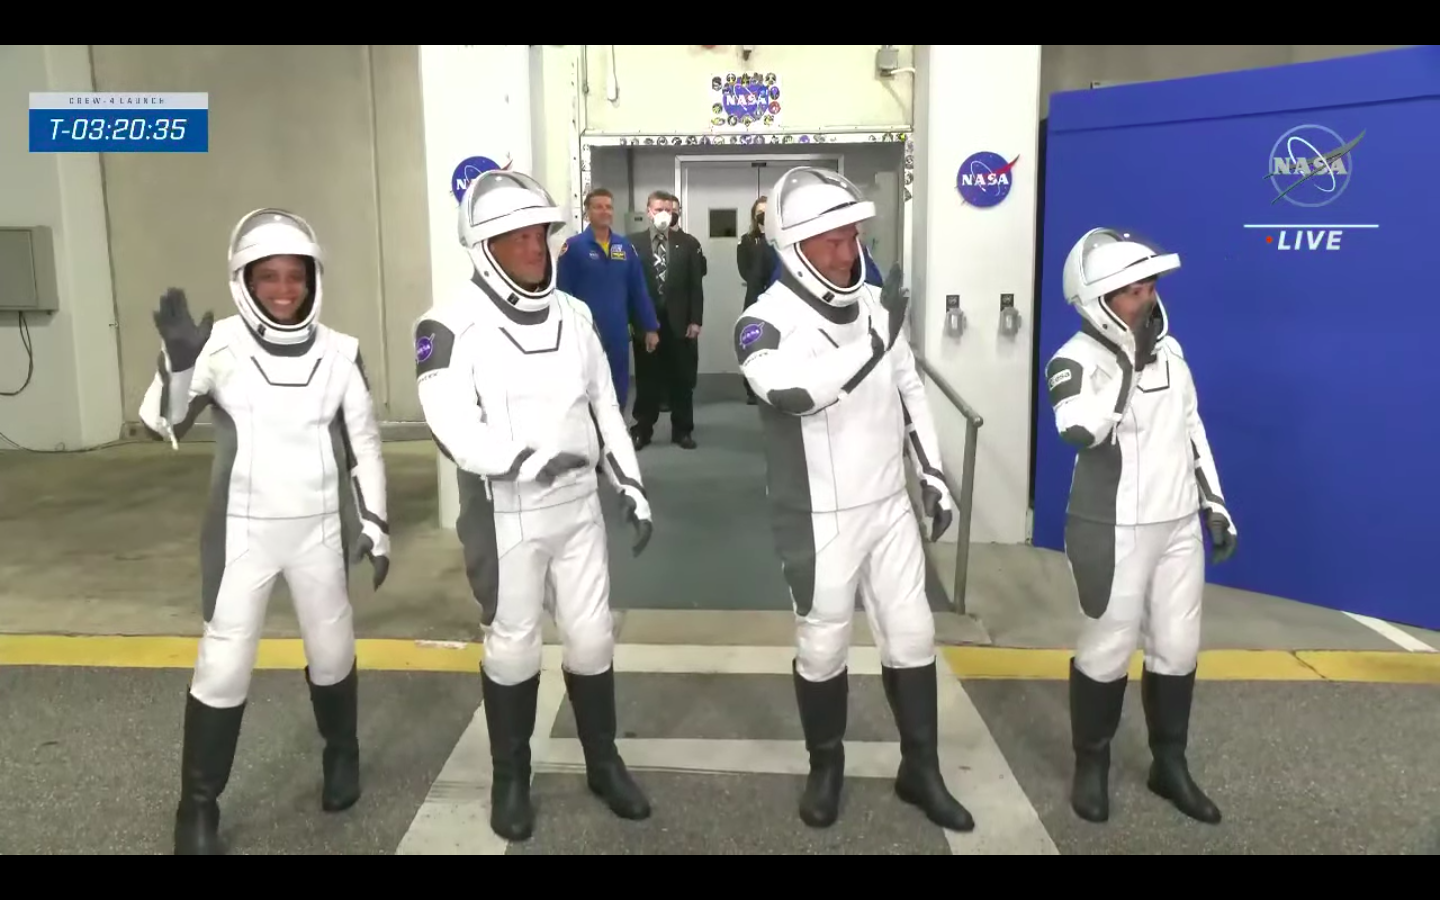 The Crew-4 astronauts walk out of the Neil Armstrong Operations and Checkout Building at NASA's Kennedy Space Center at about 12:30 am EDT (0430 GMT) on April 27, 2022. They soon got into Teslas that drove them to KSC's Launch Pad 39A .